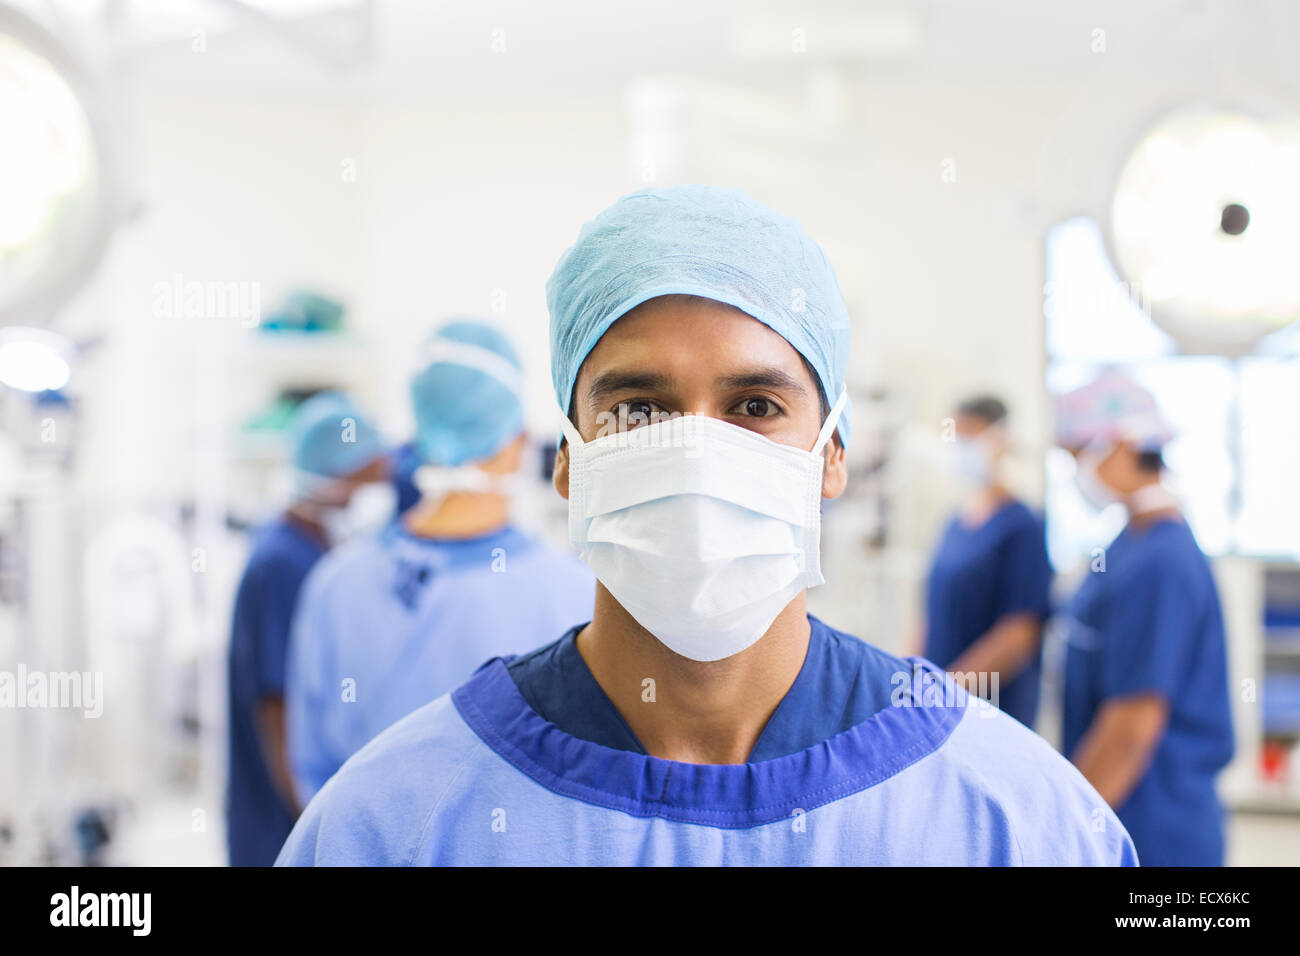 Portrait of surgeon wearing surgical cap, mask and gown in operating theater Stock Photo